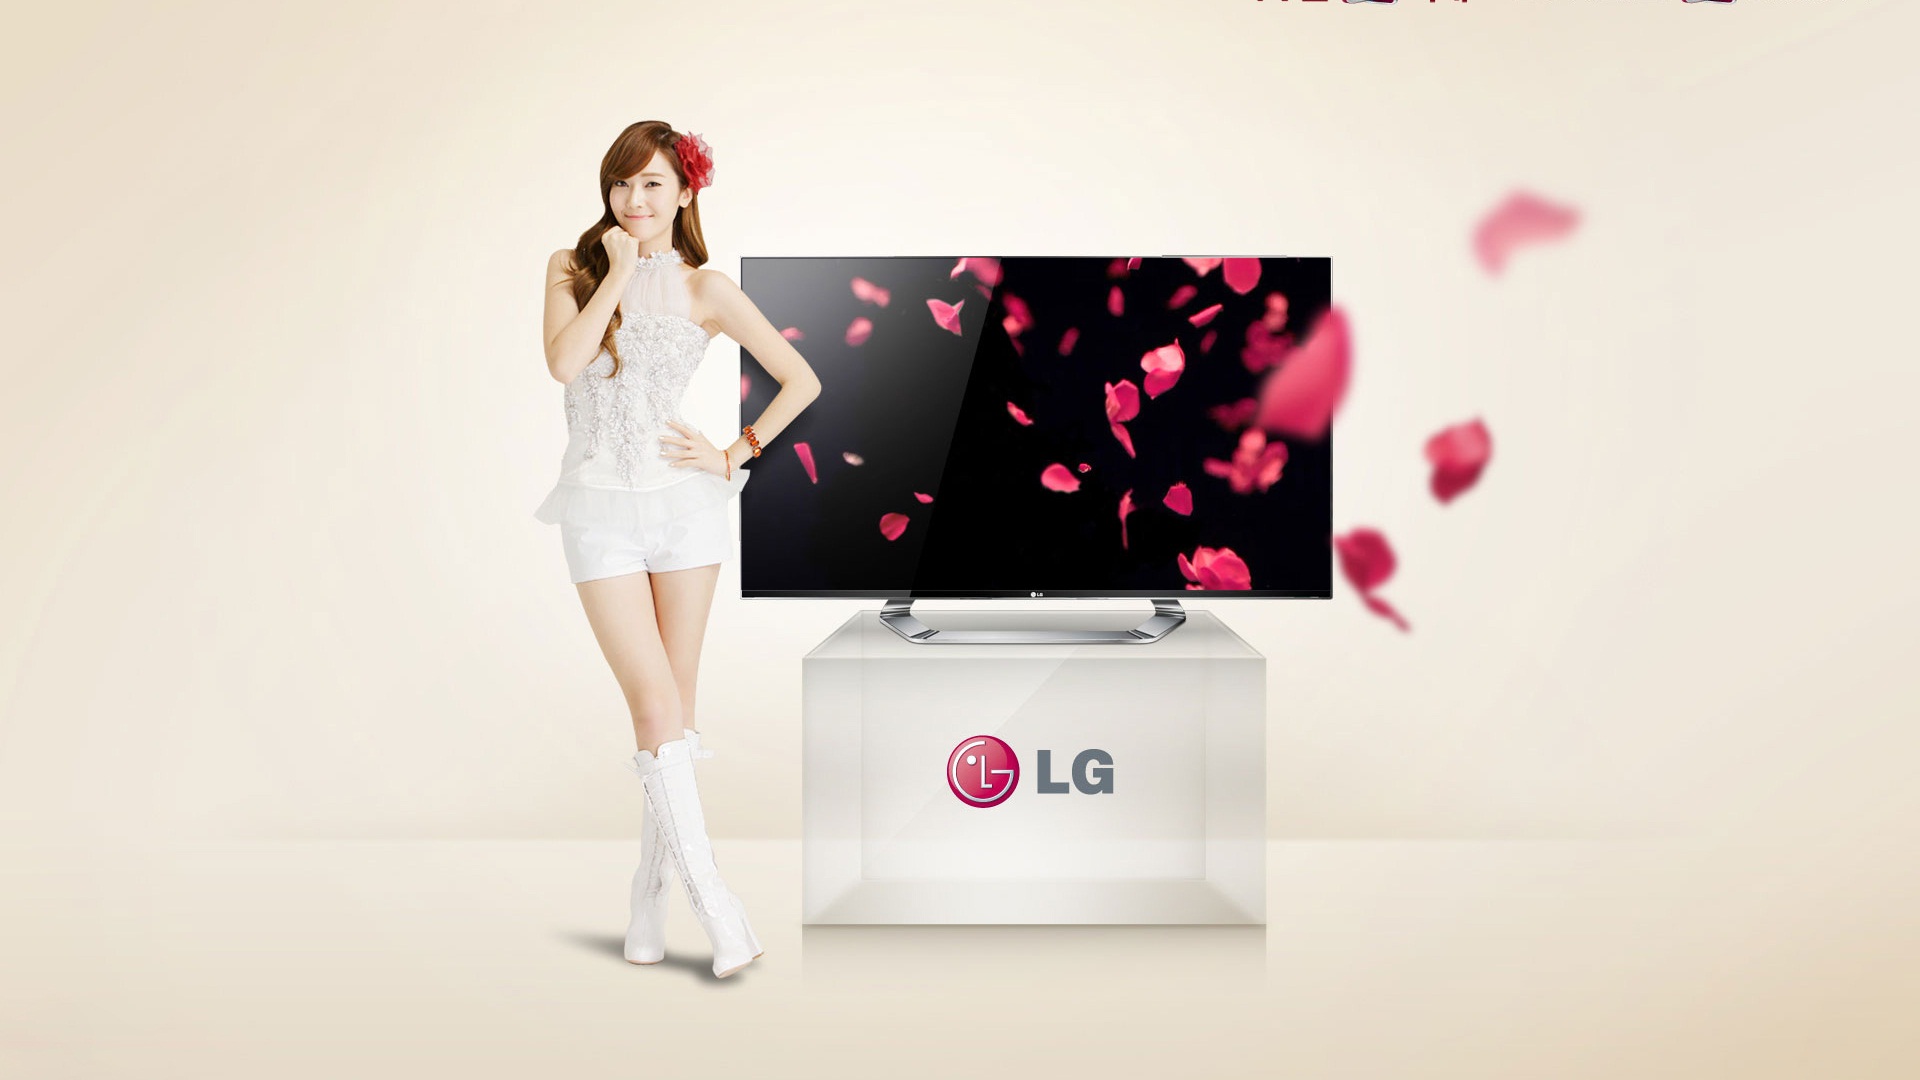 Girls Generation ACE and LG endorsements ads HD wallpapers #18 - 1920x1080